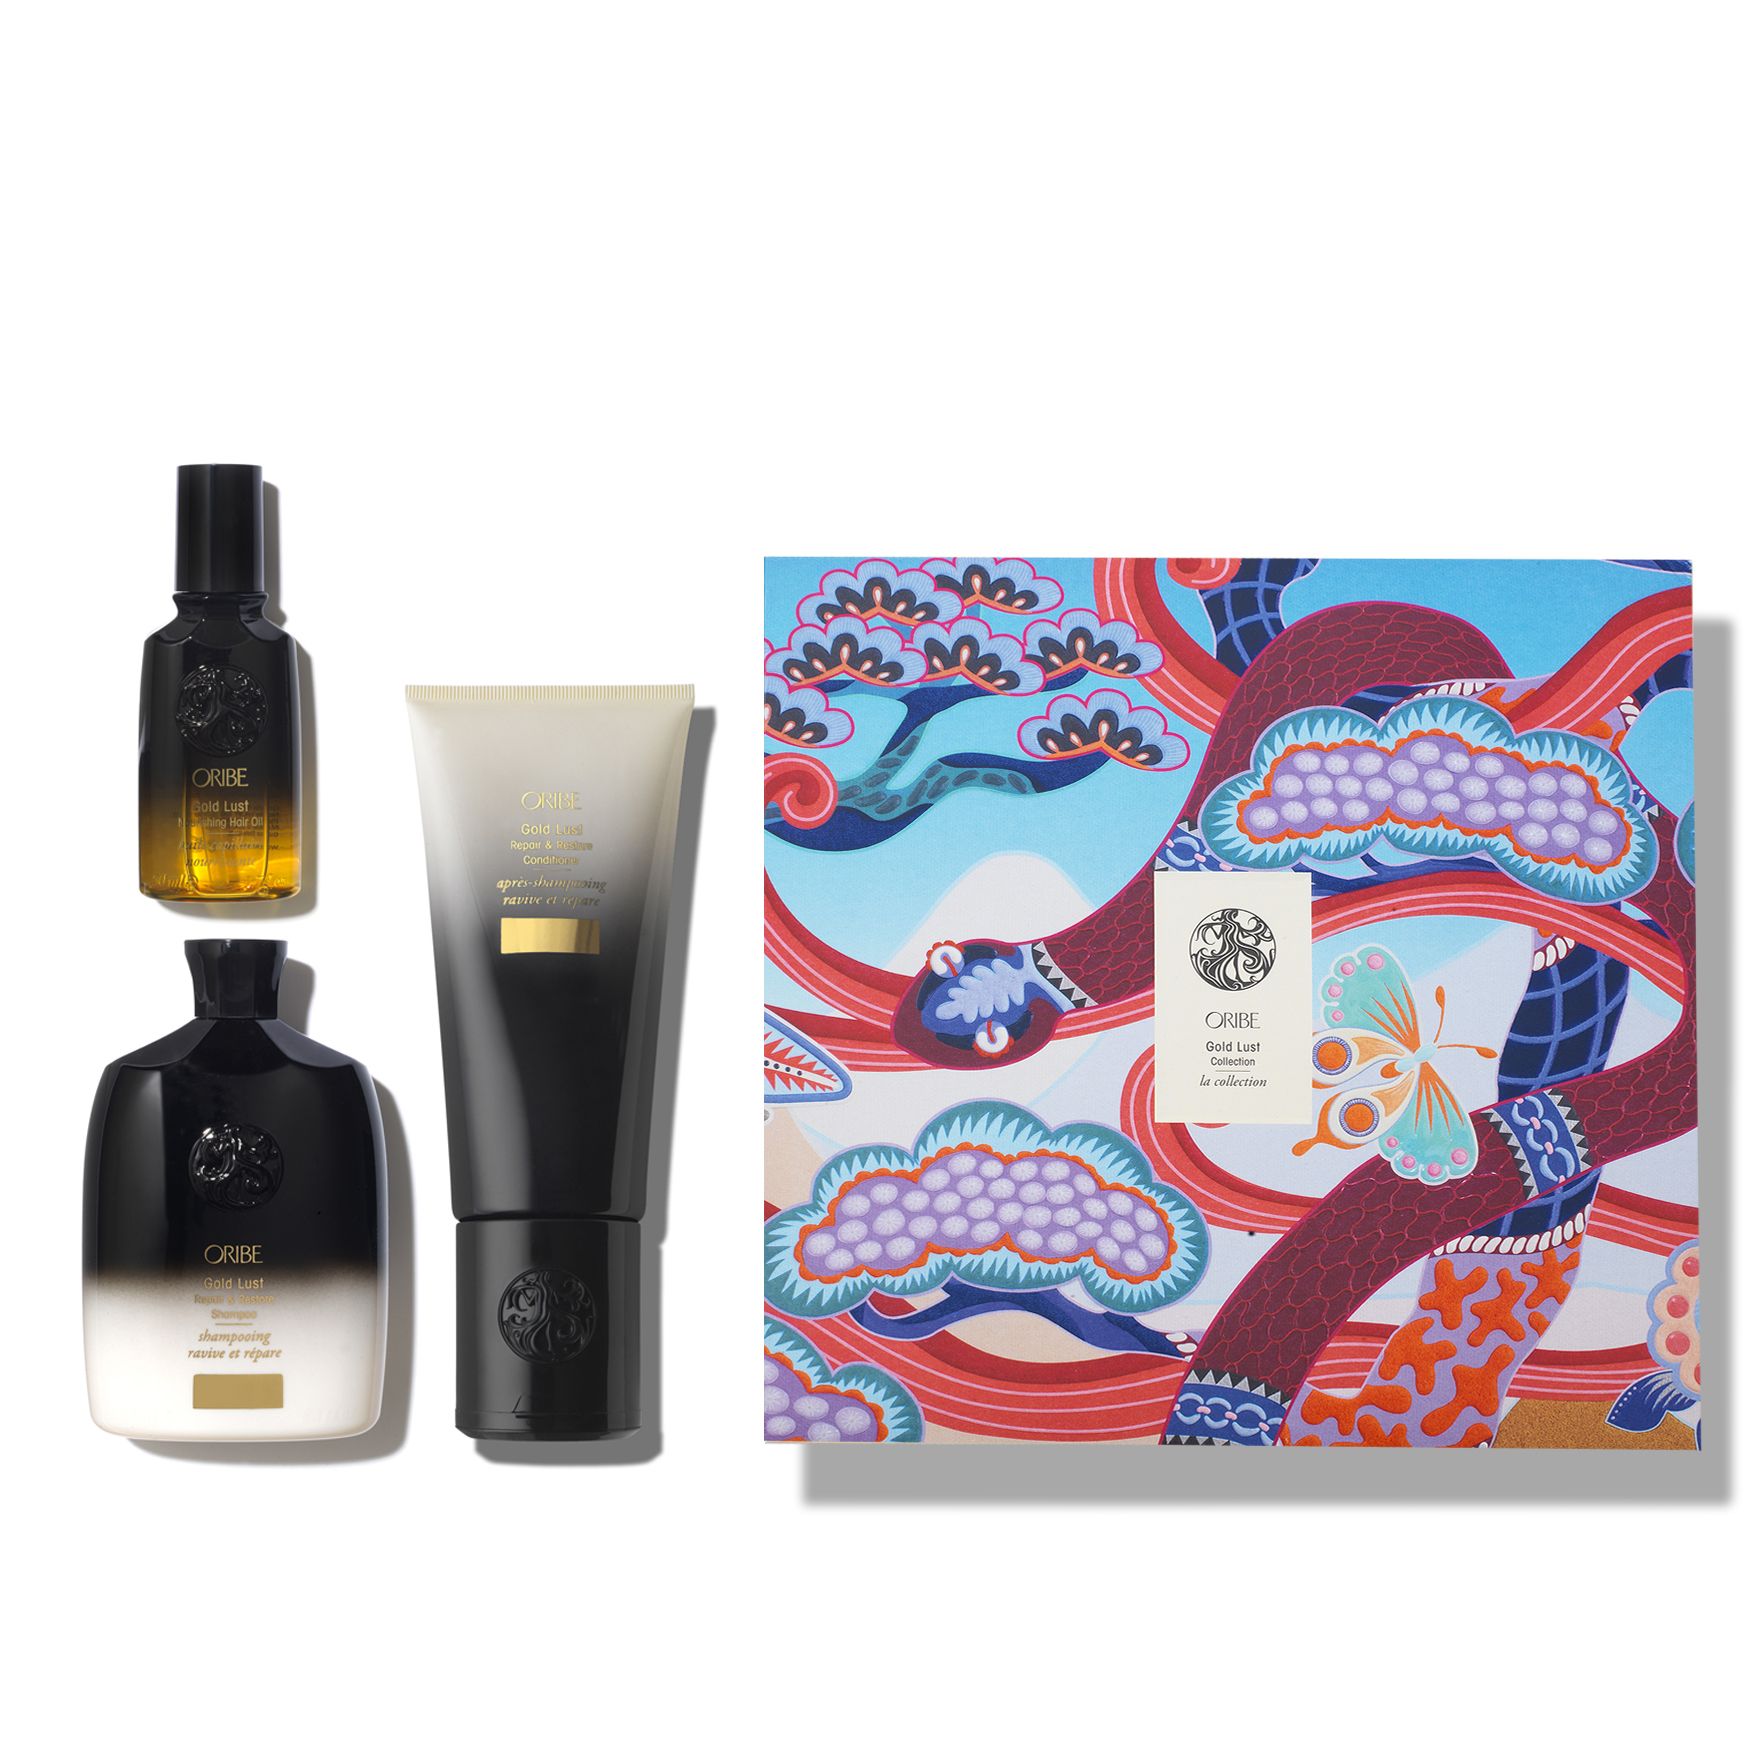 Oribe Gold Lust Collection Set | Space NK | Space NK (US)